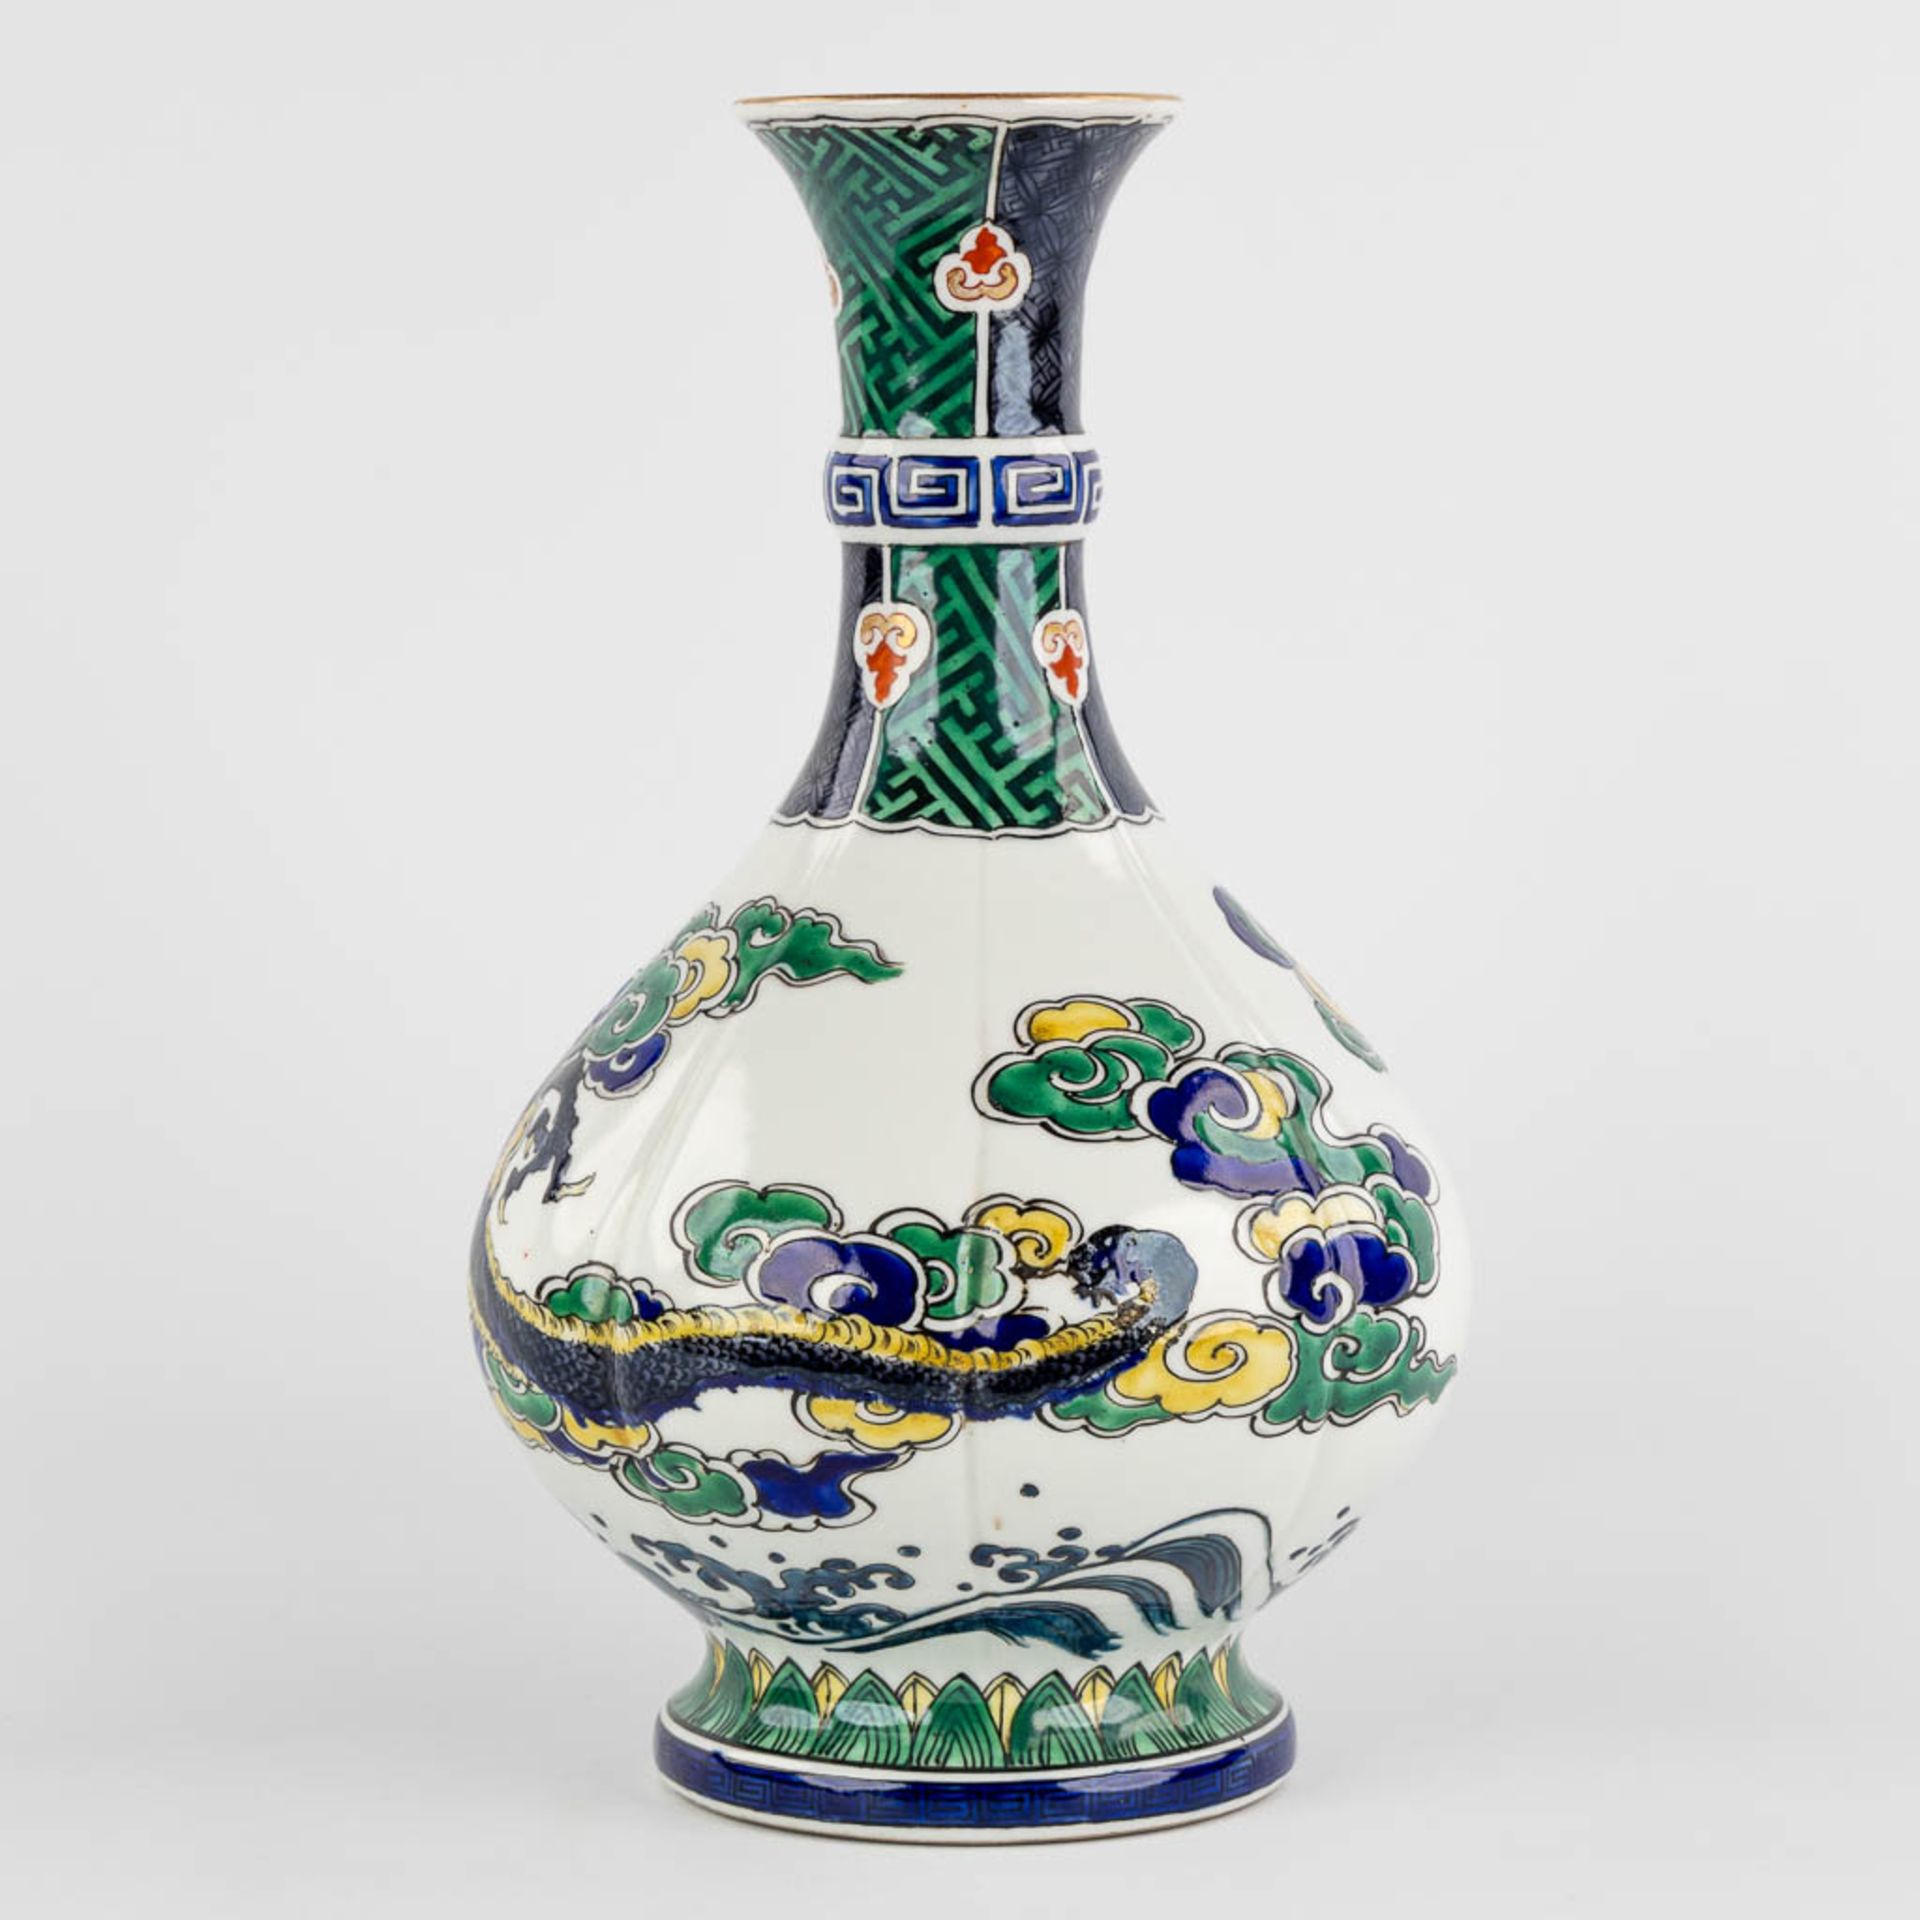 An antique Japanese vase with a three clawed dragon decor, 19th C. (H:30 x D:18 cm) - Image 4 of 10